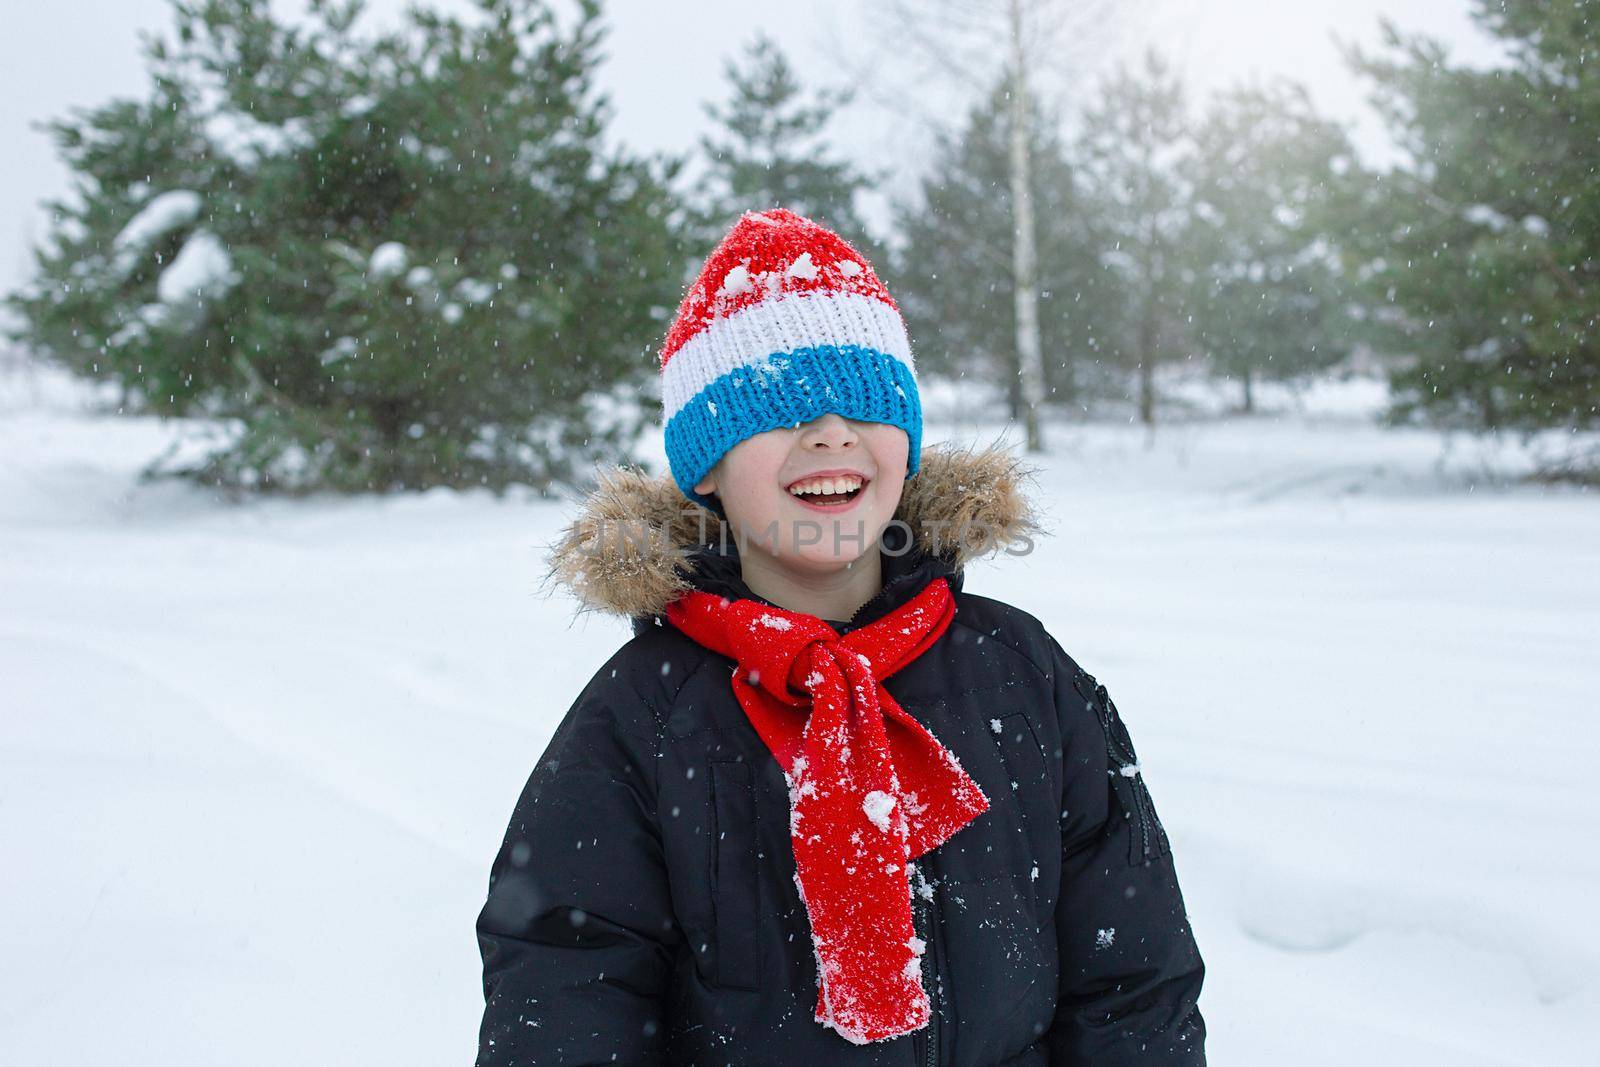 Portrait of a happy boy in bright winter clothes and a red scarf stands in a striped hat pulled down over his eyes, smiling, in a winter park with pine trees